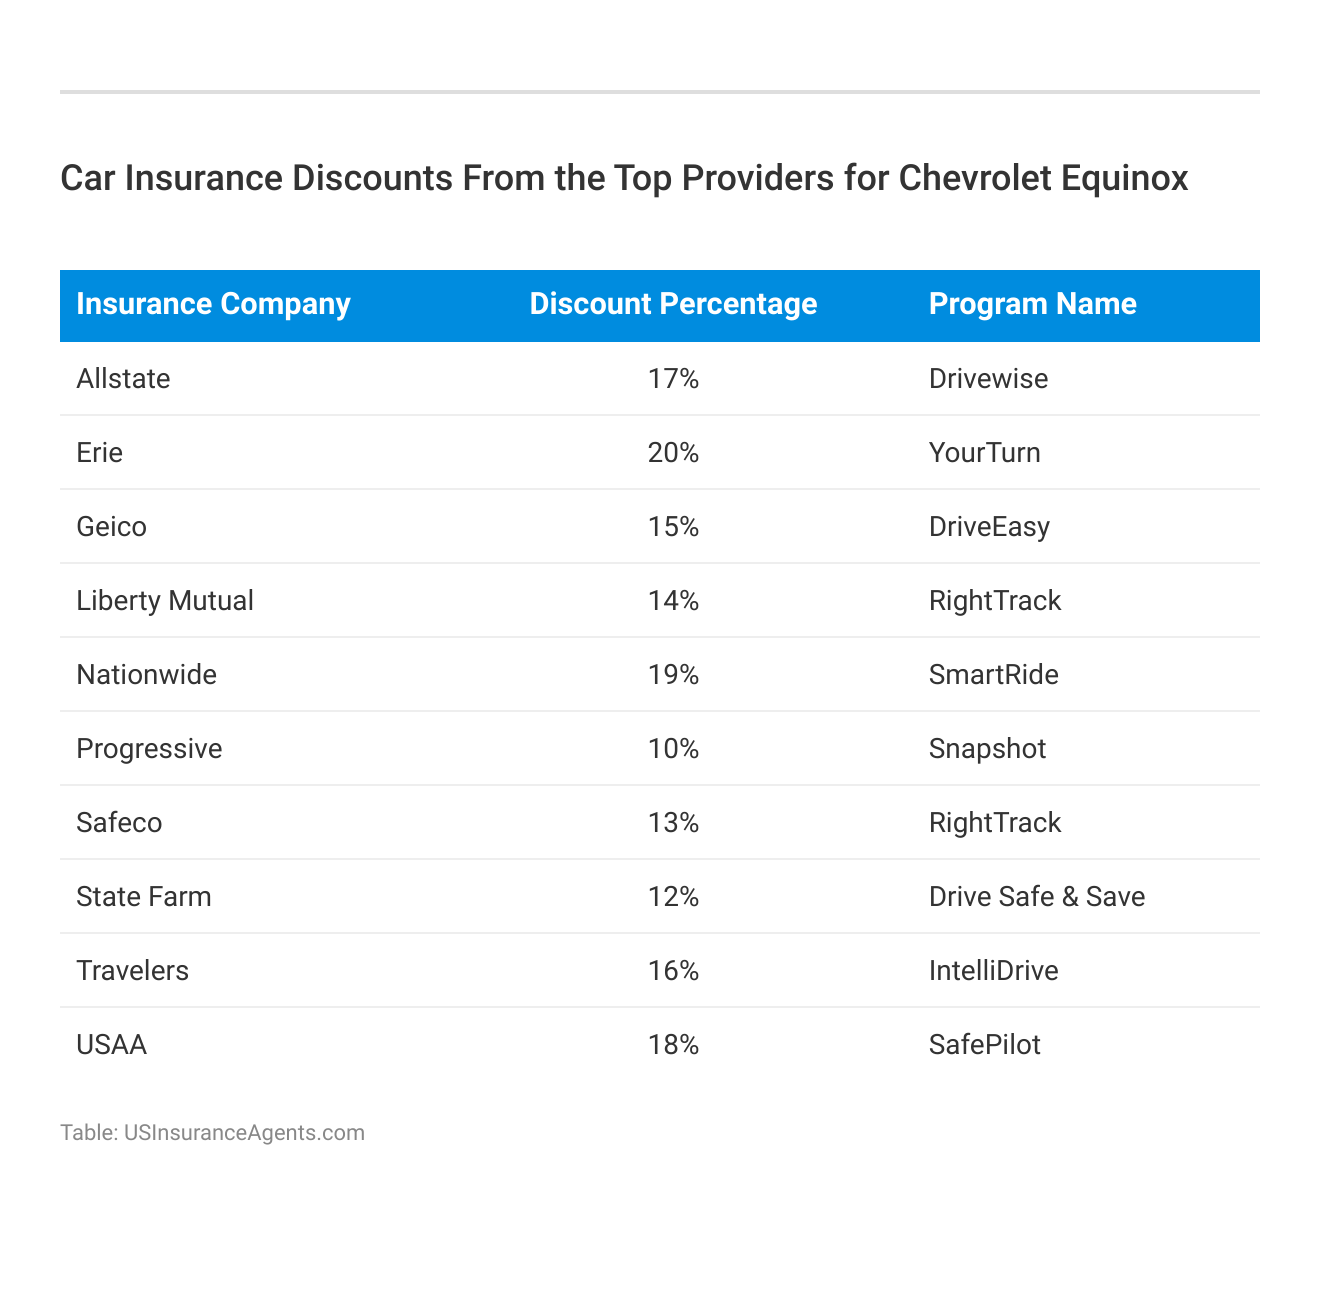 <h3>Car Insurance Discounts From the Top Providers for Chevrolet Equinox</h3>